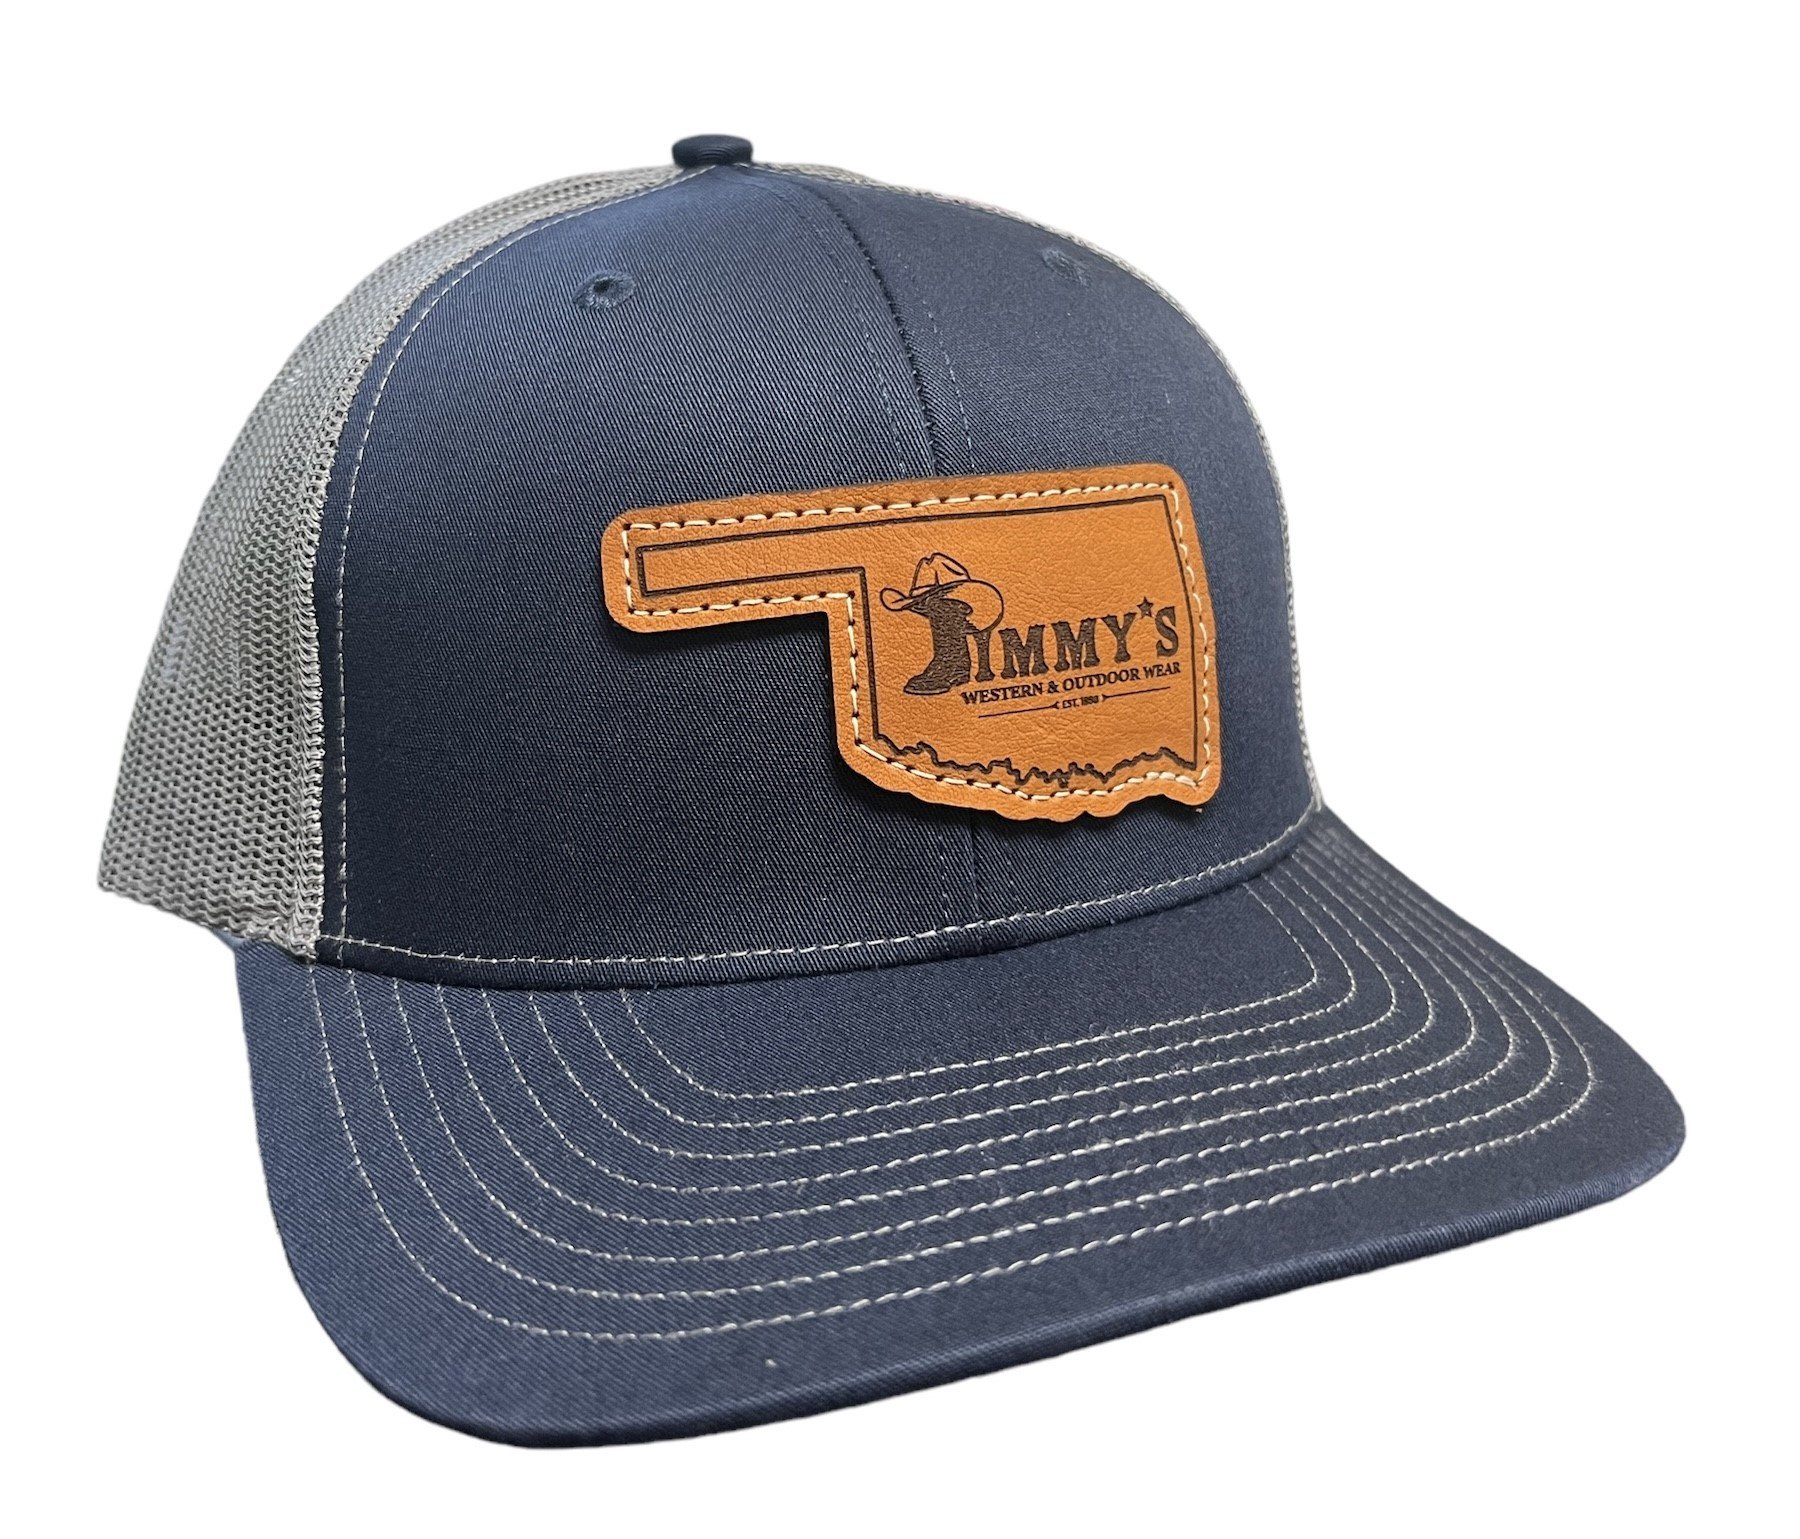 Jimmys Western Wear Navy & Charcoal Oklahoma Leather Patch Cap 